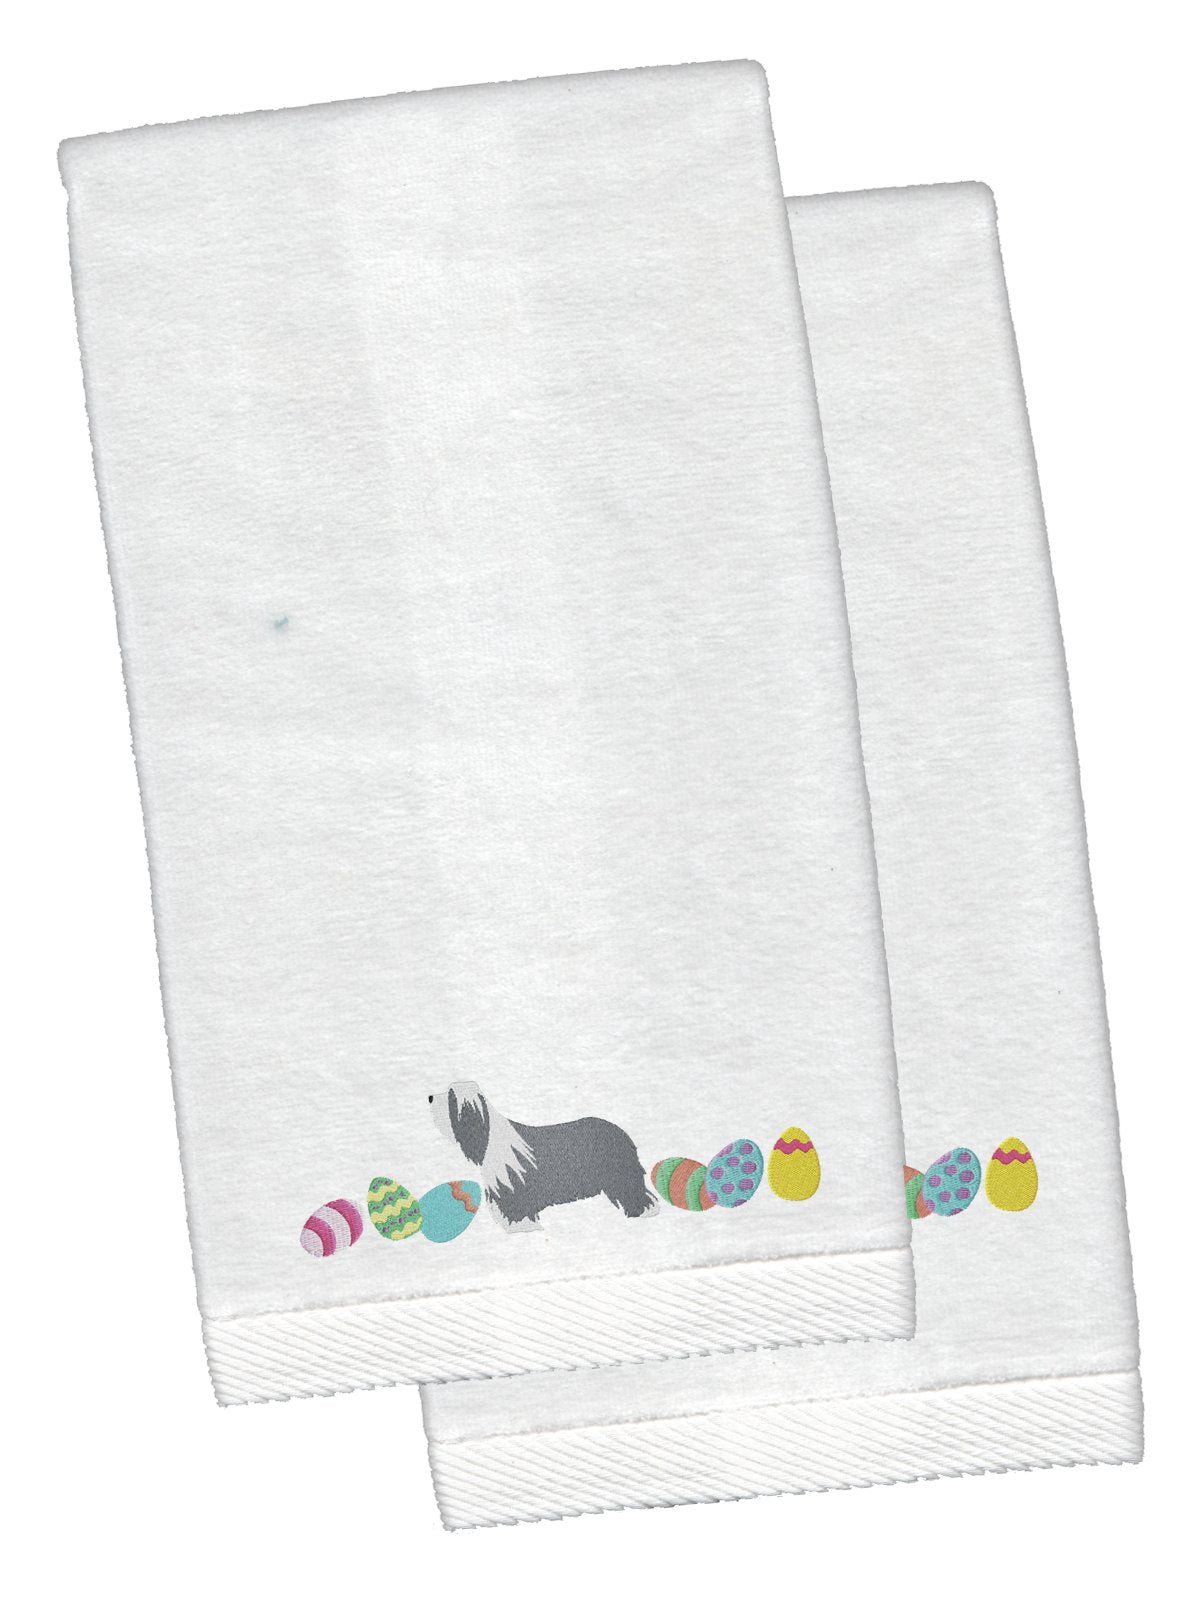 Bearded Collie Easter White Embroidered Plush Hand Towel Set of 2 CK1605KTEMB by Caroline's Treasures